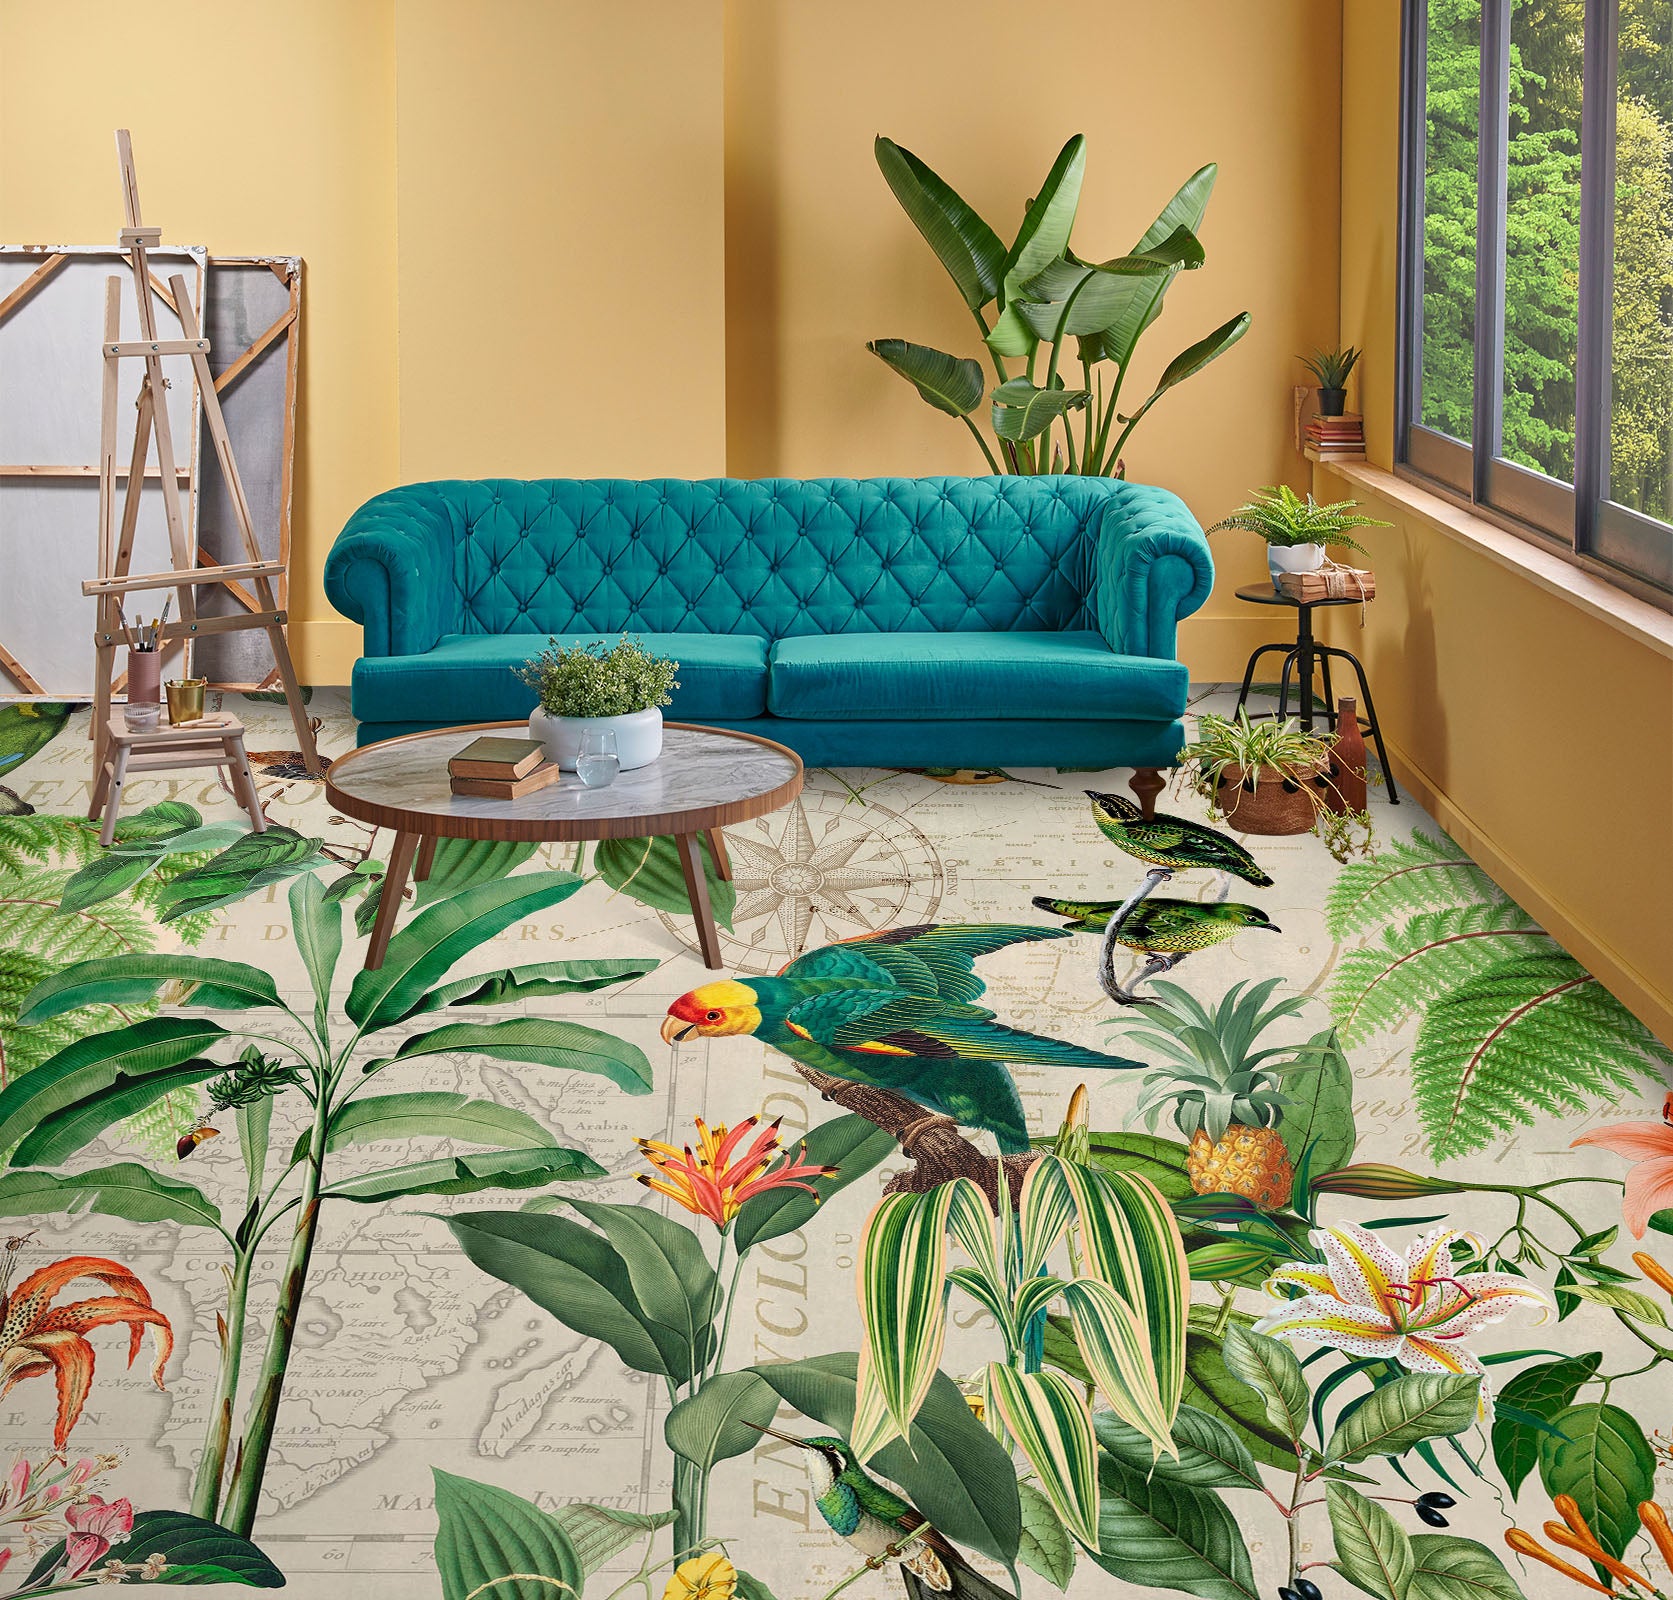 3D Leaves Parrot 104163 Andrea Haase Floor Mural  Wallpaper Murals Self-Adhesive Removable Print Epoxy